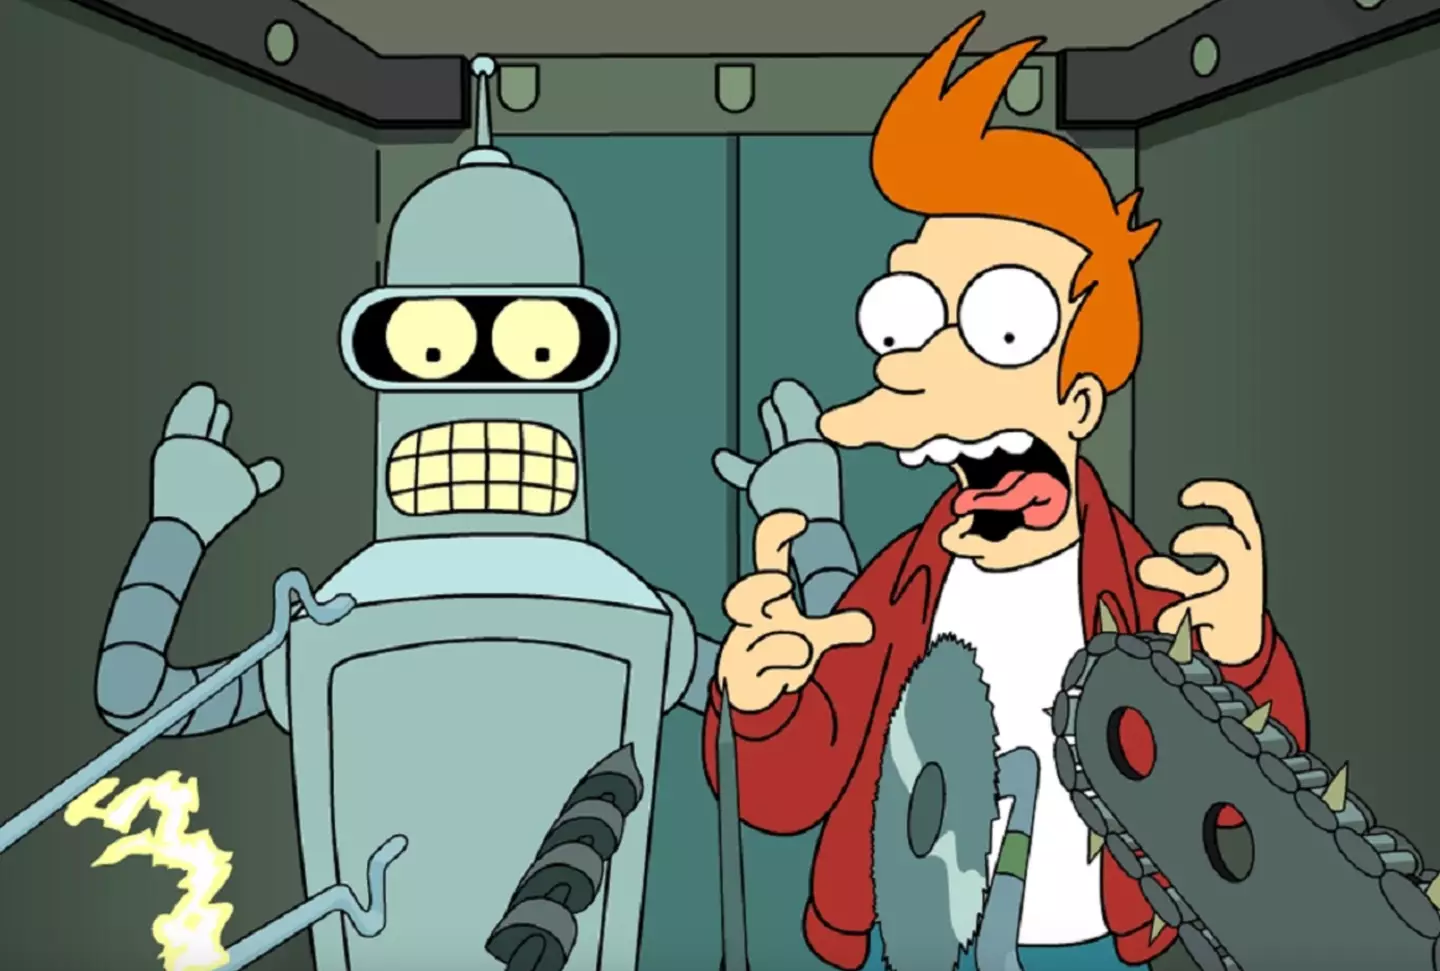 Bender and Fry first met in a suicide booth.